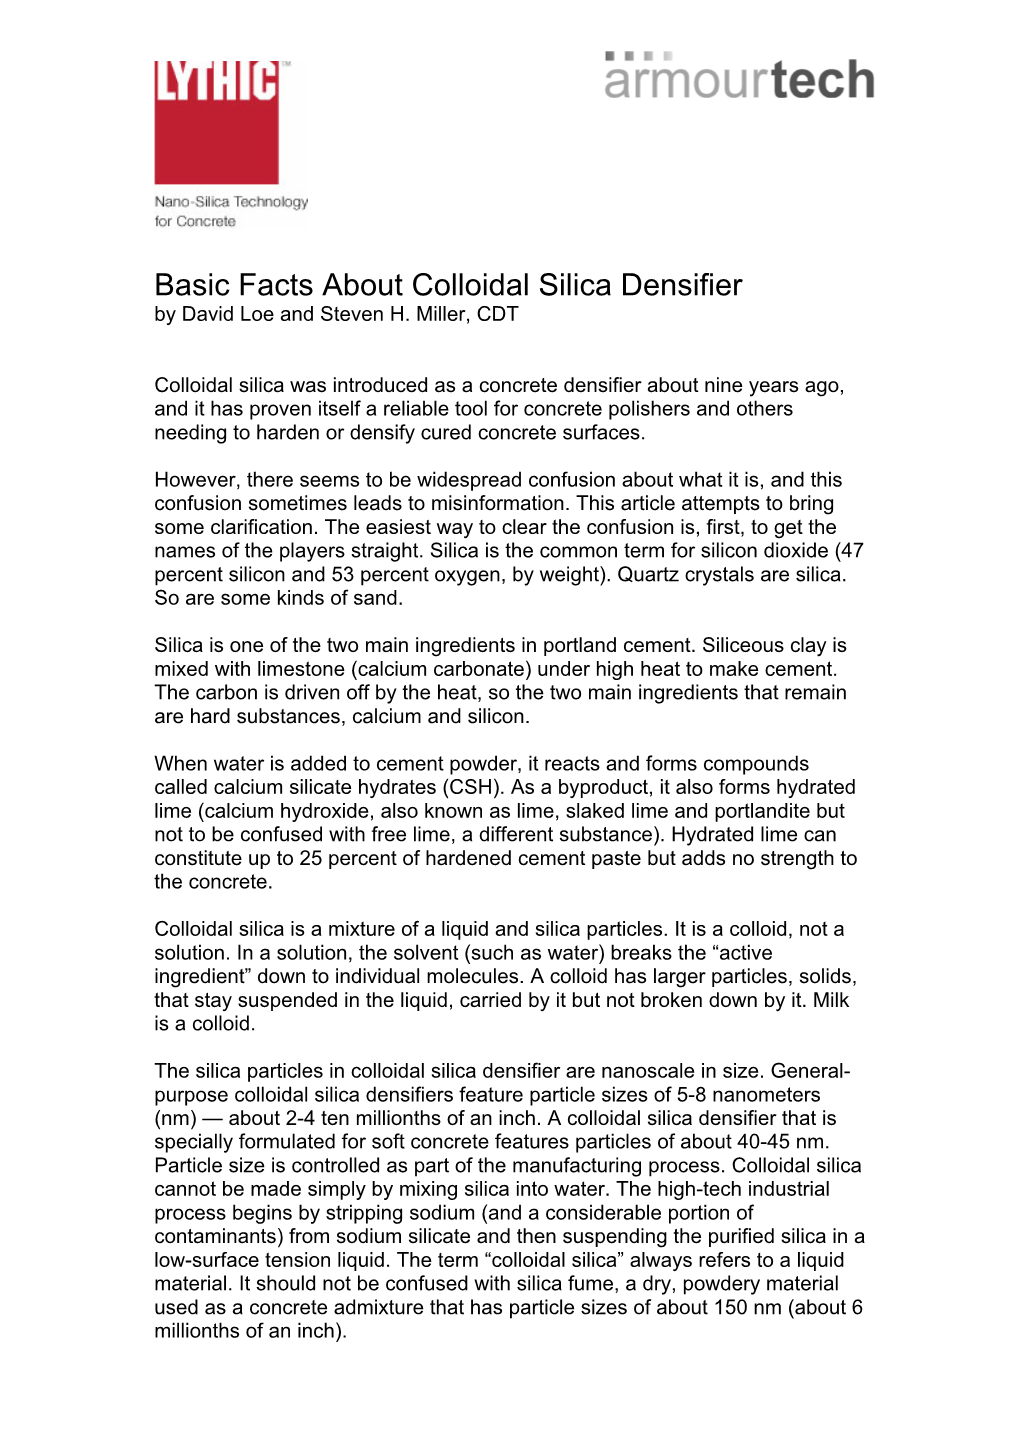 Basic Facts About Colloidal Silica Densifier by David Loe and Steven H